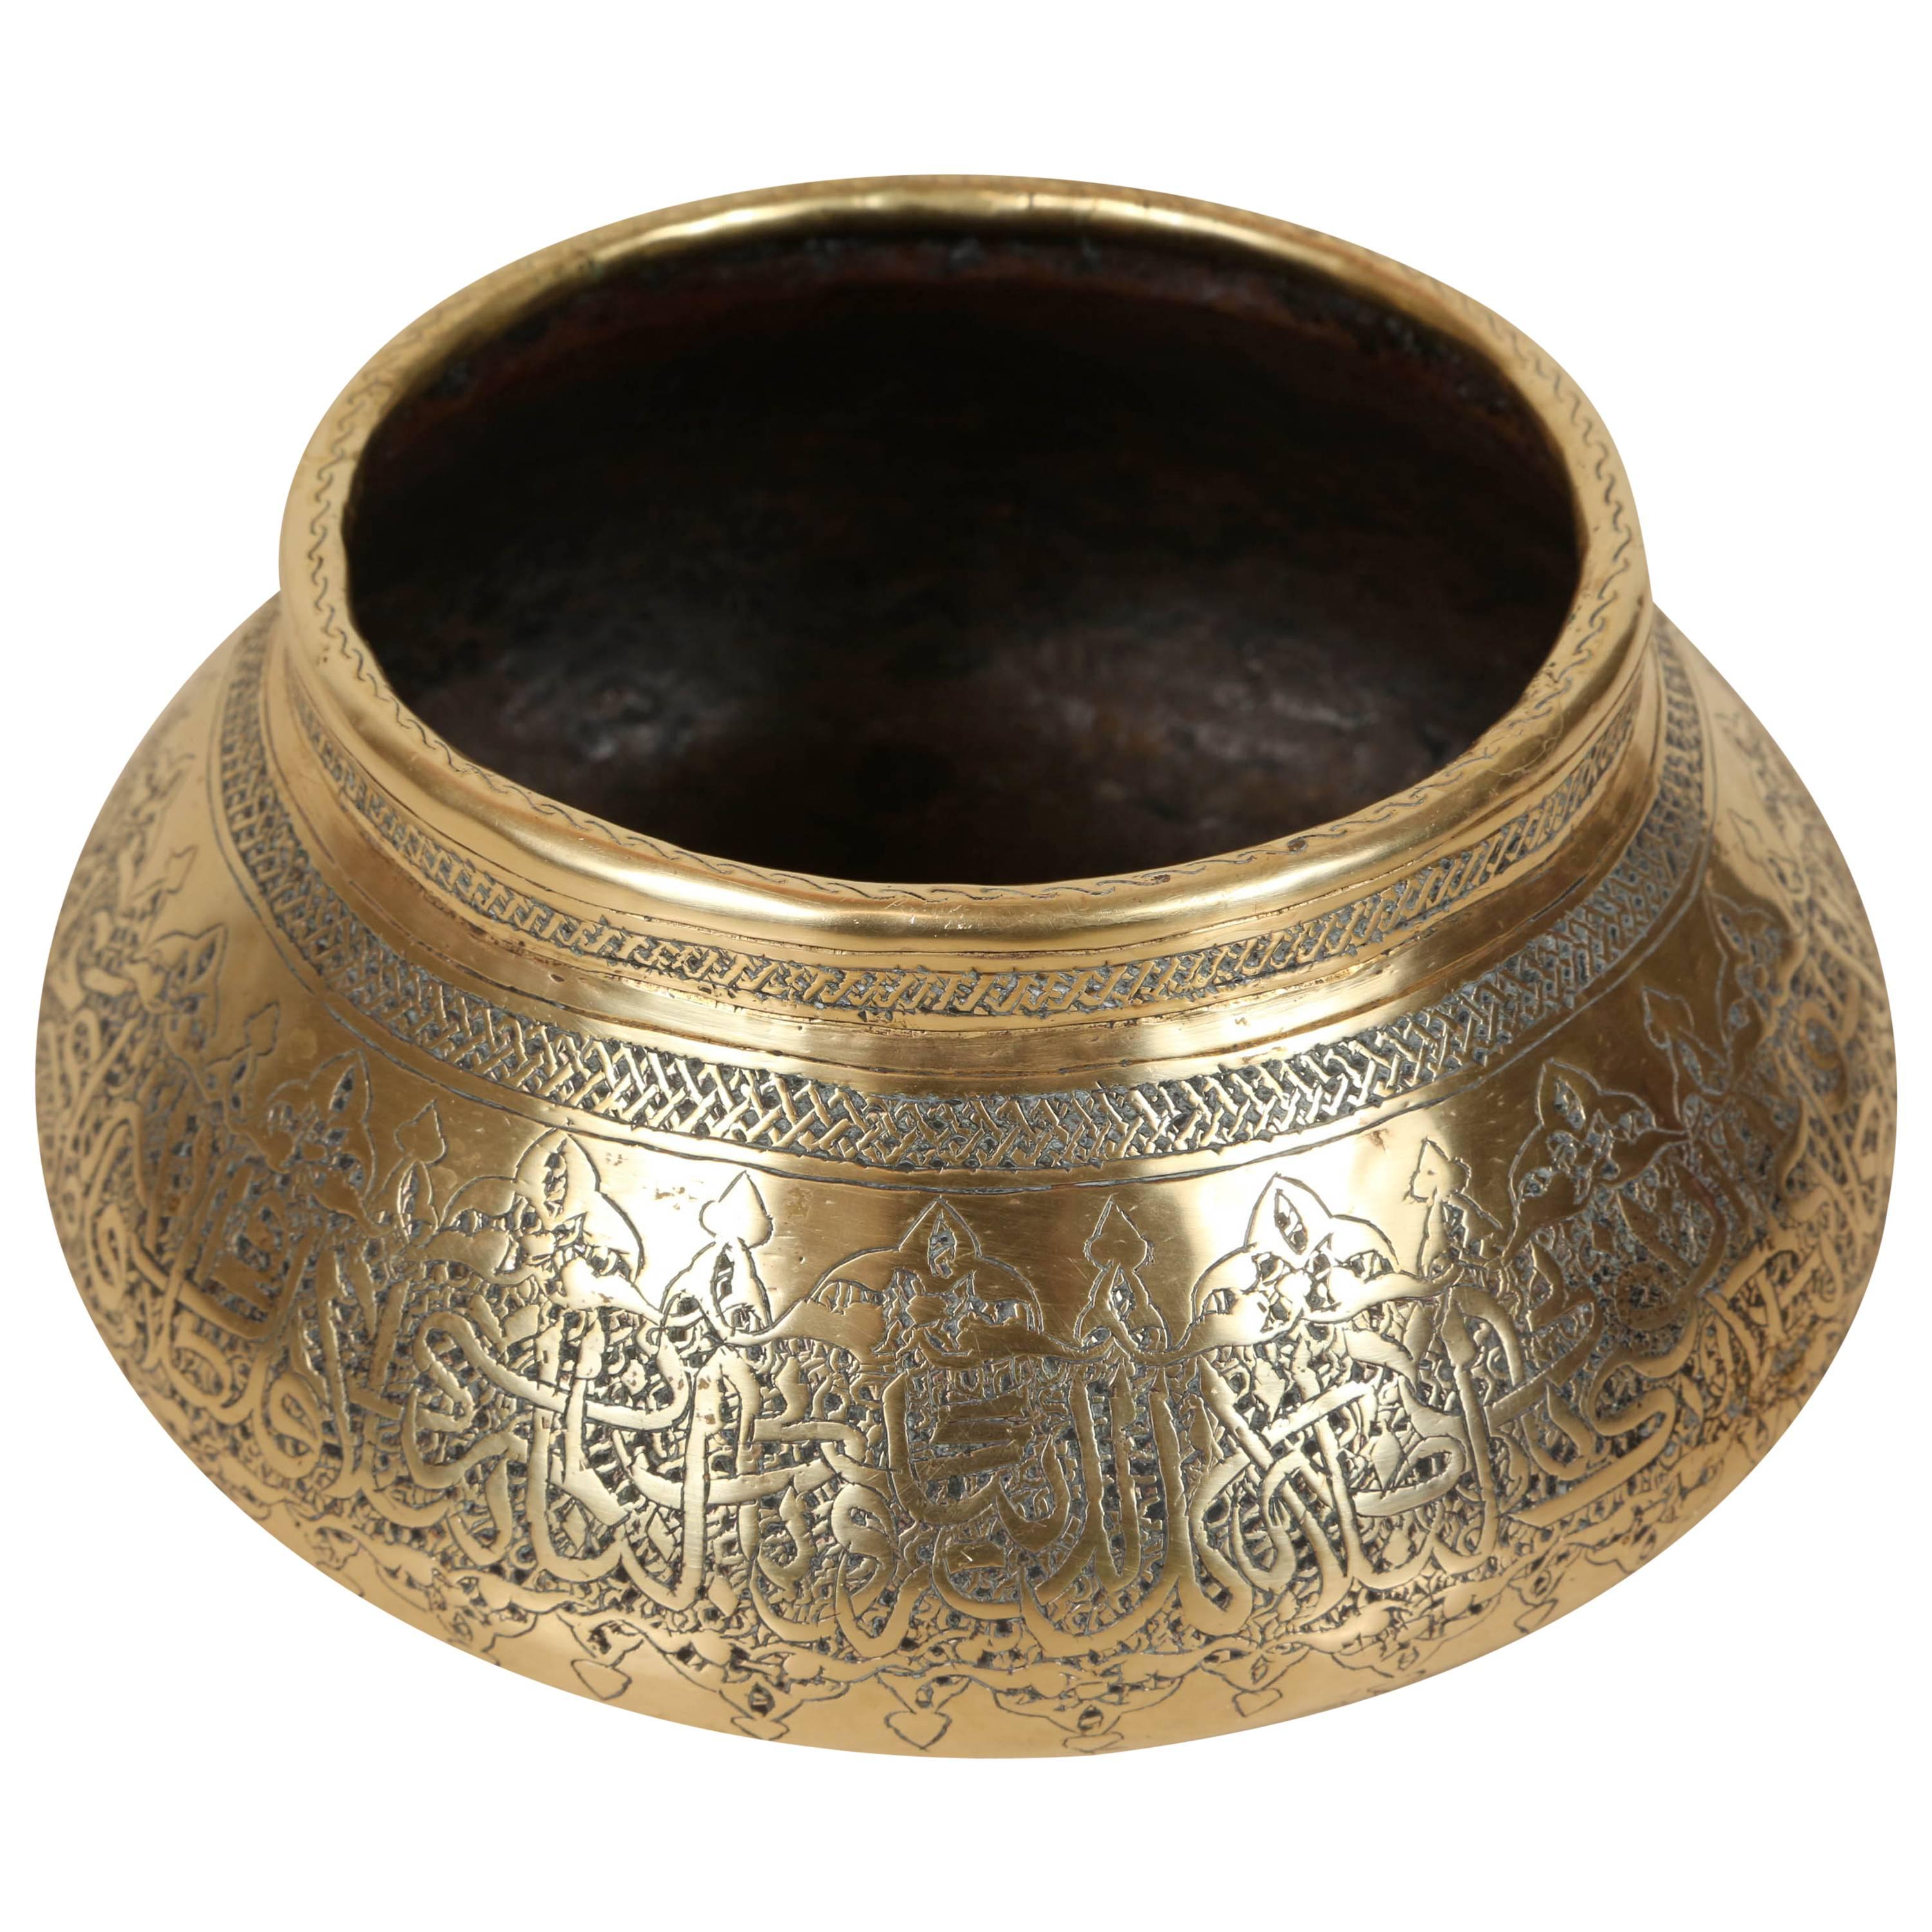 Moorish Revival Hand Etched Brass Bowl